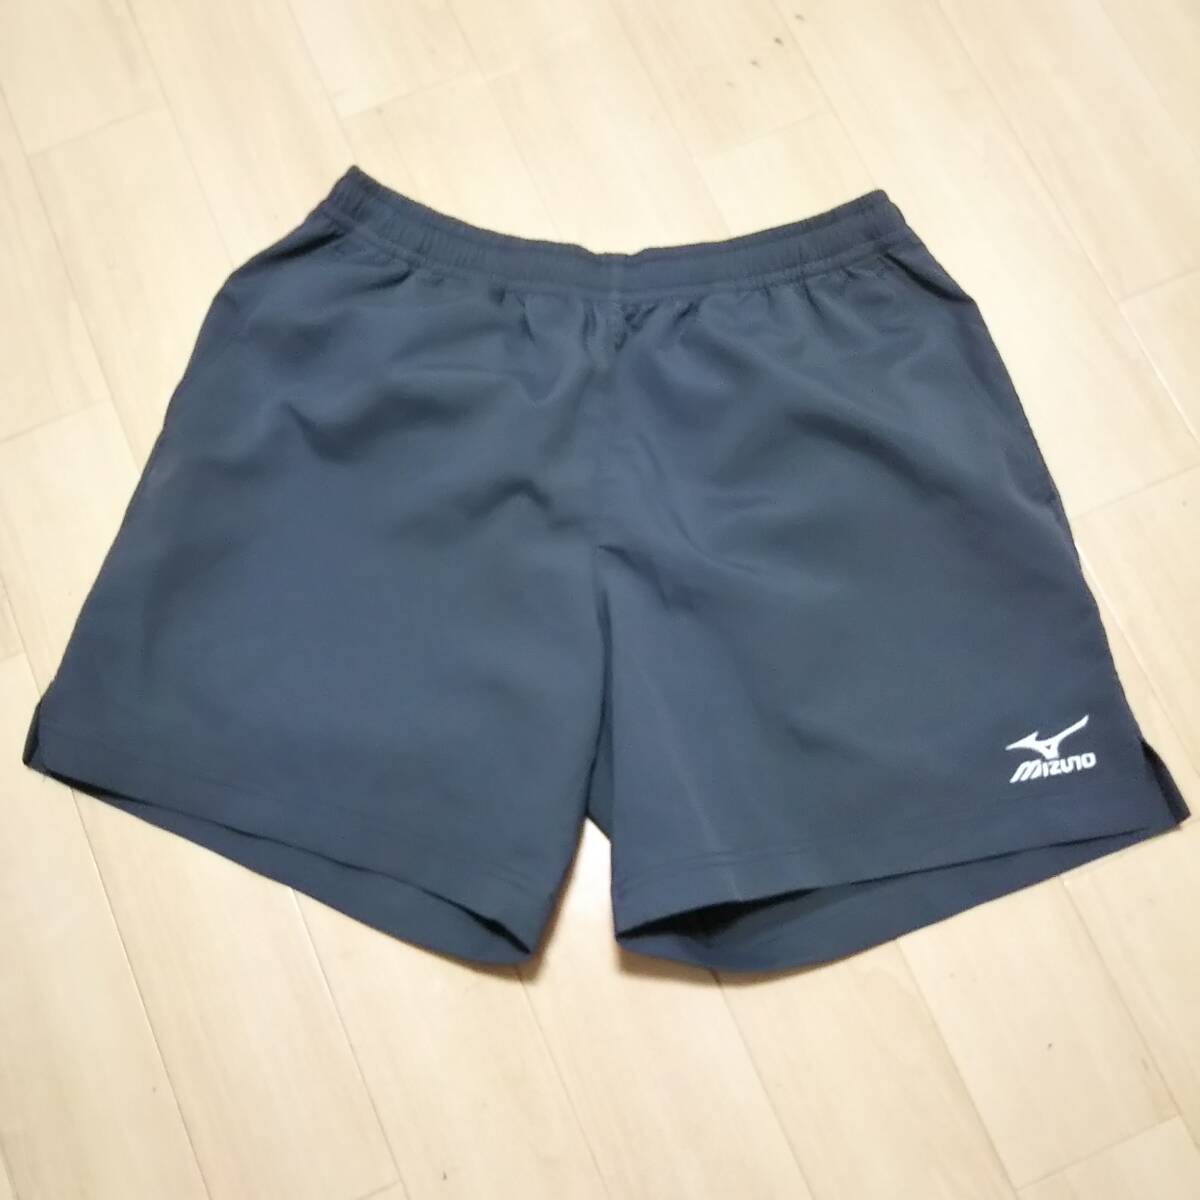 187* secondhand goods / free shipping # Mizuno / shorts # lady's O size # charcoal 